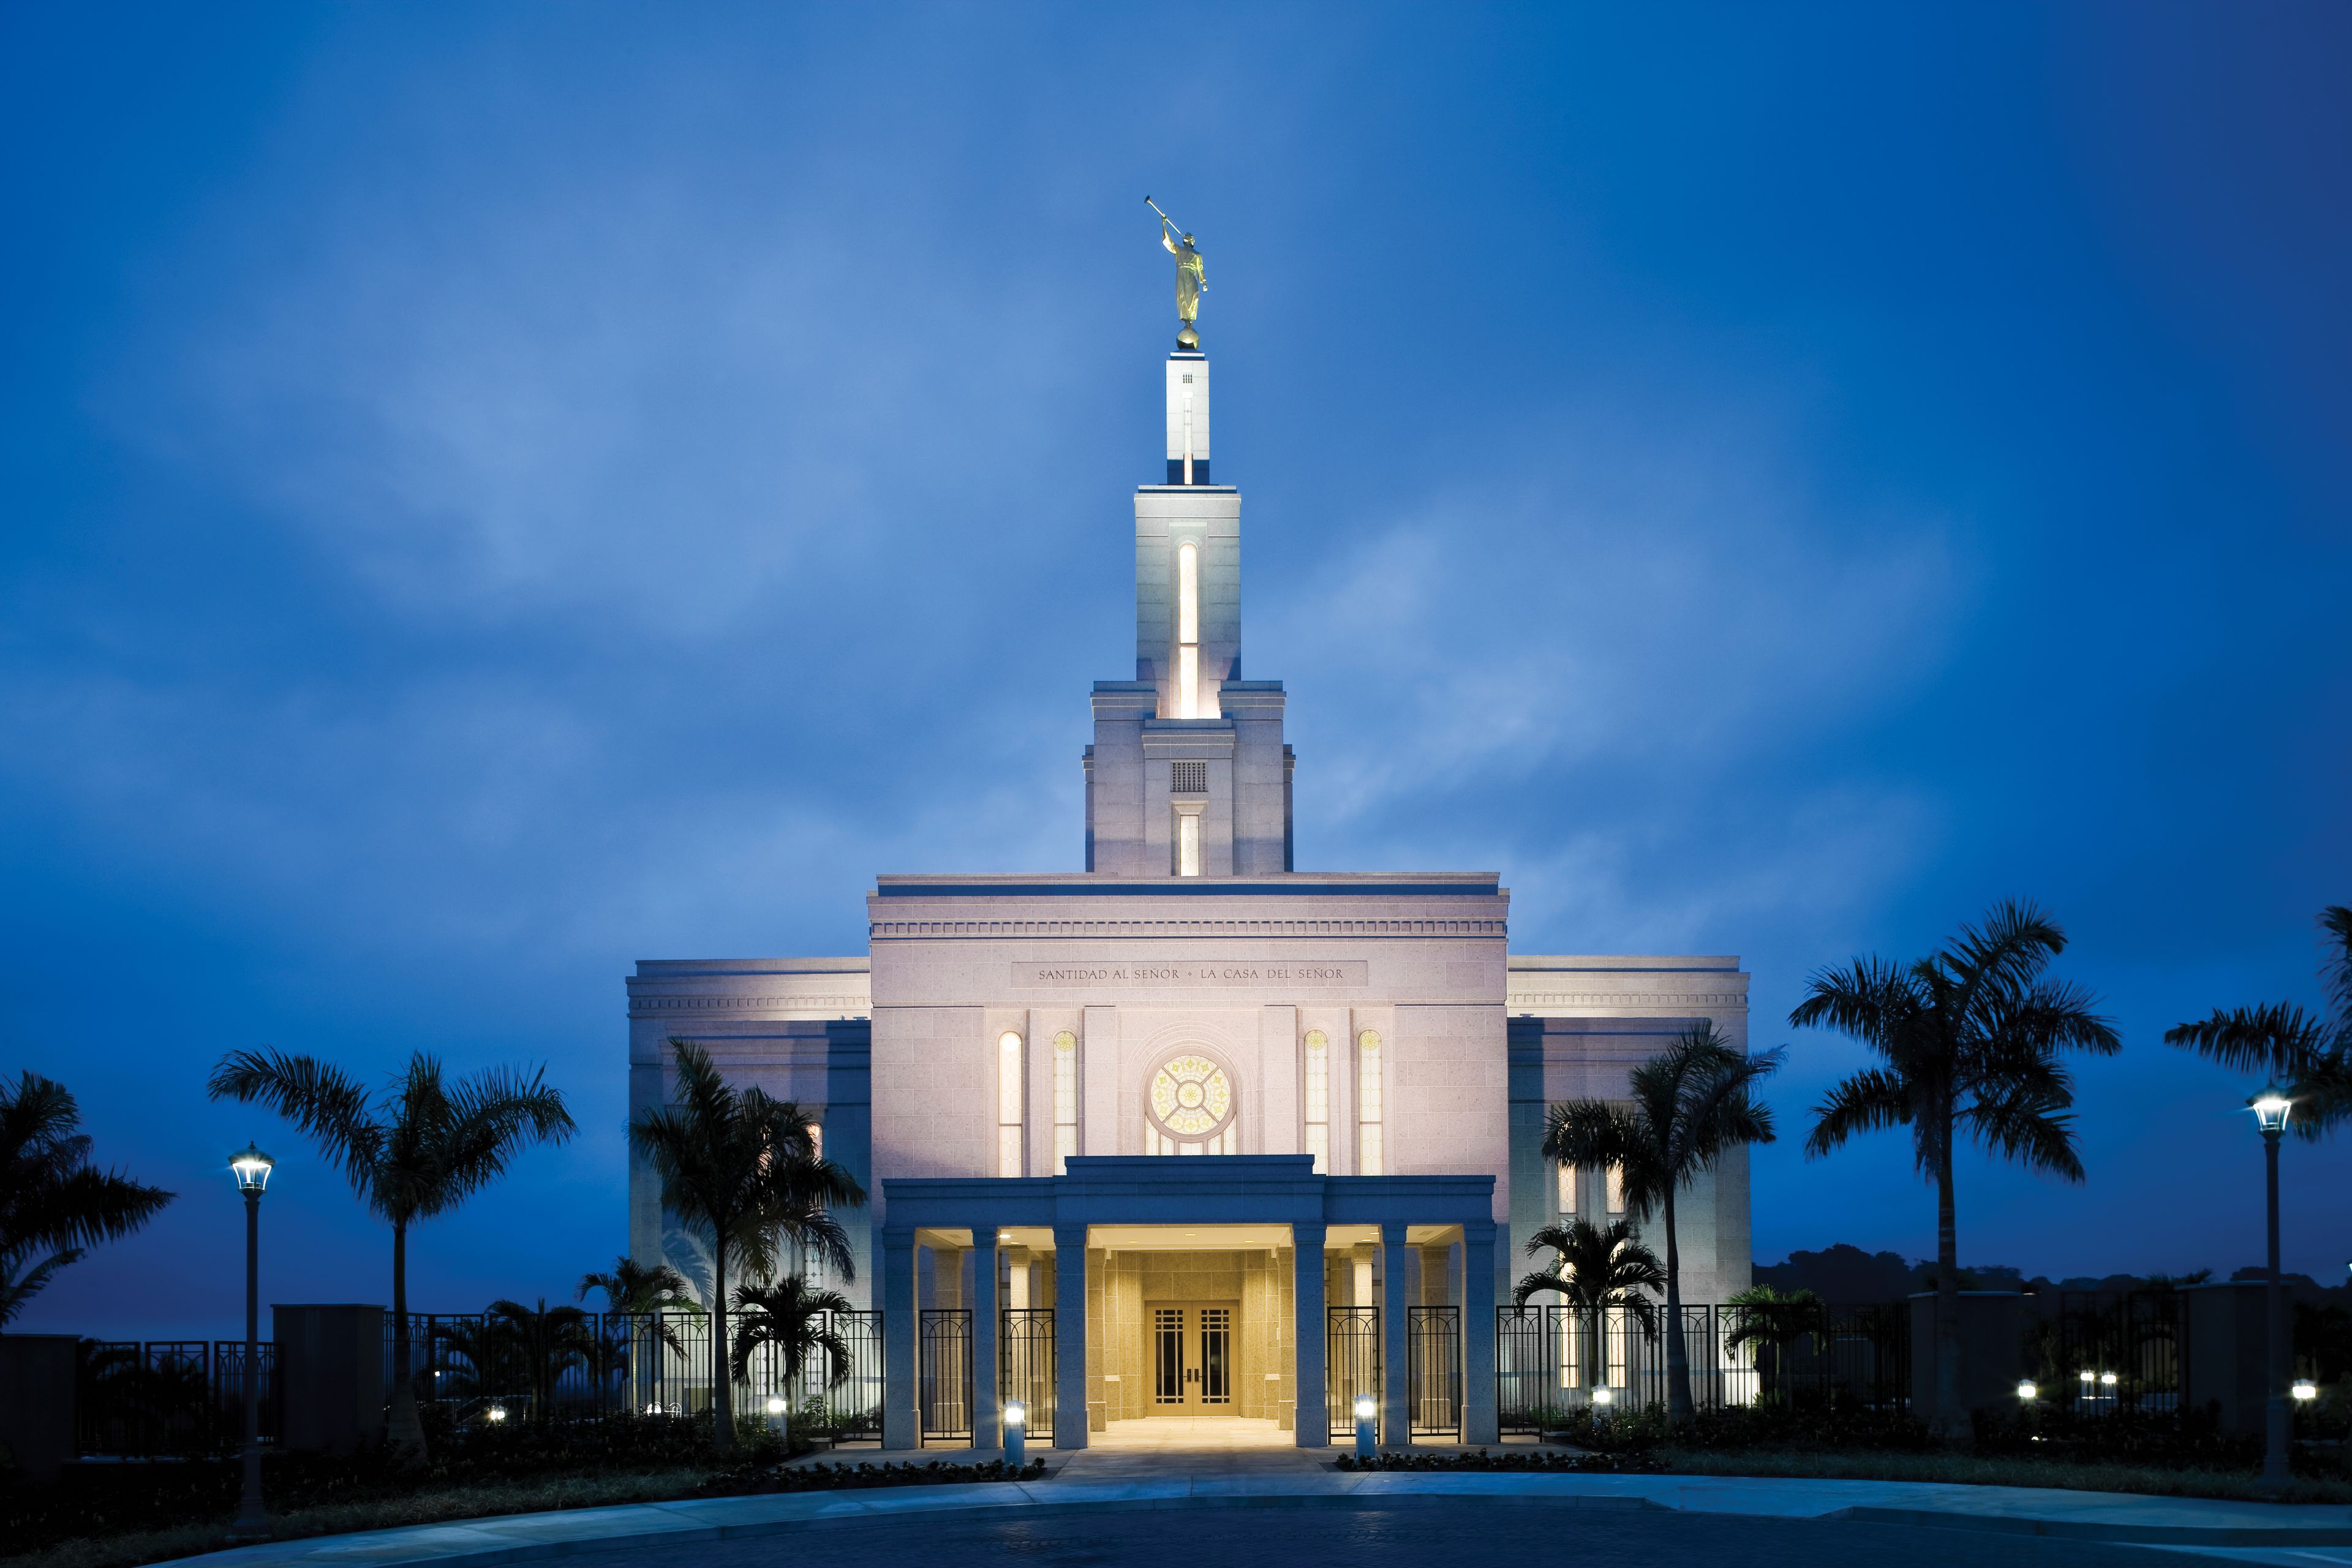 The Panama City Panama Temple in the evening, including the entrance.